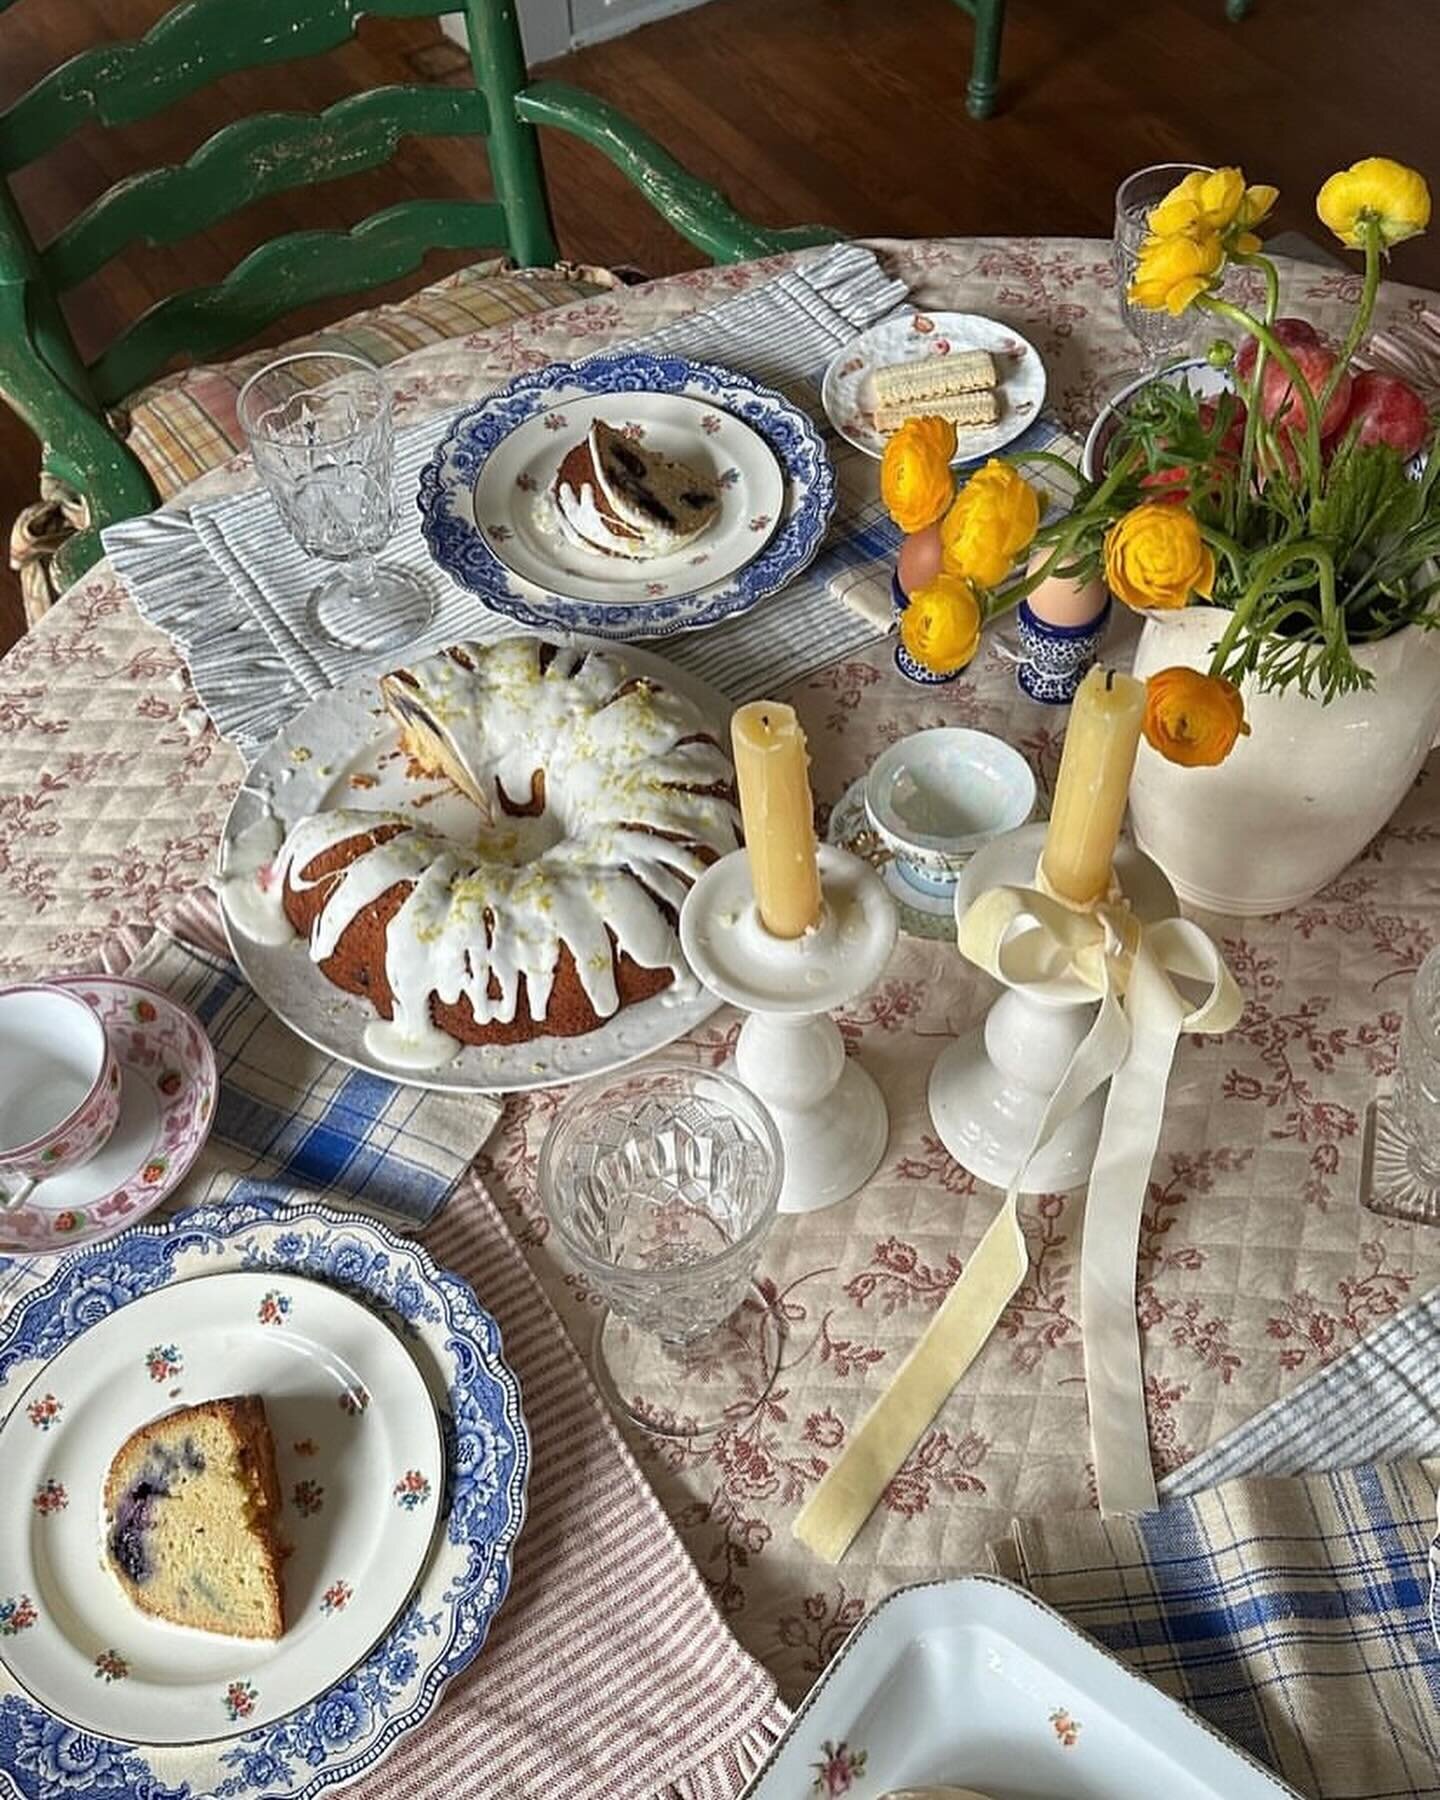 Look at this beautiful spring table setting by @itsmargoroth with the blue checkered linen napkins she purchased from the shop!  The colors of everything put together are so beautiful!  Looks like an English tea party. 🥰